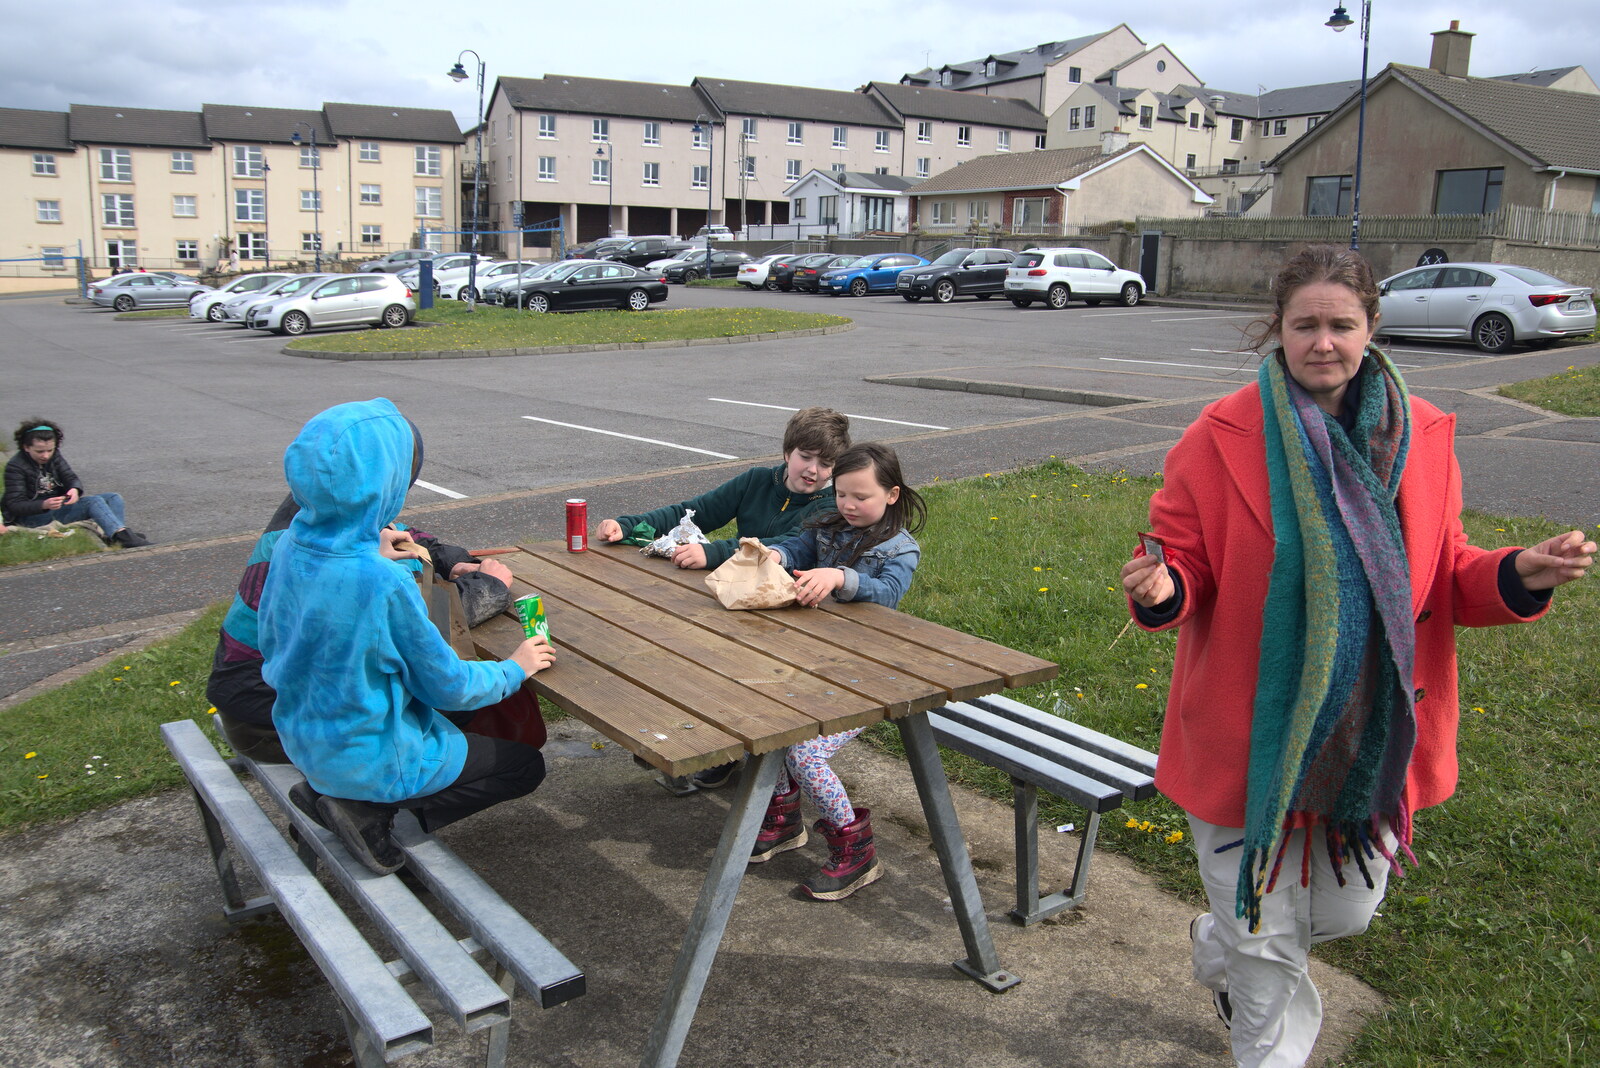 We scoff our Mexican food outside from Manorhamilton and Bundoran, Leitrim and Donegal, Ireland - 16th April 2022